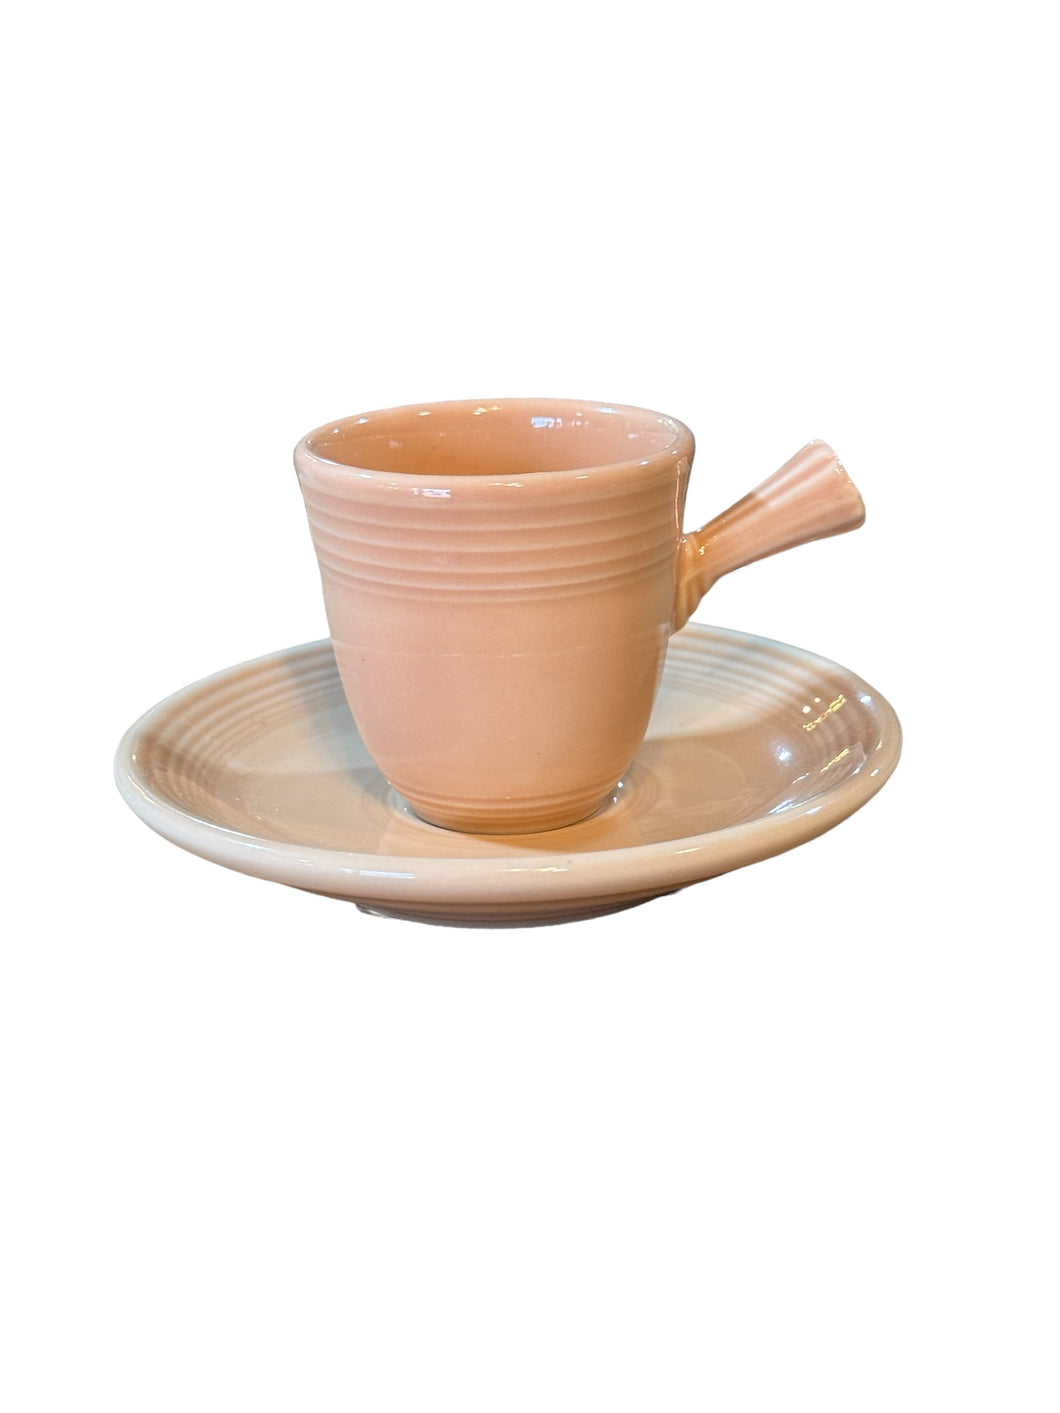 Fiesta Apricot Stick Handled Demi Cup and Saucer Peach Childs